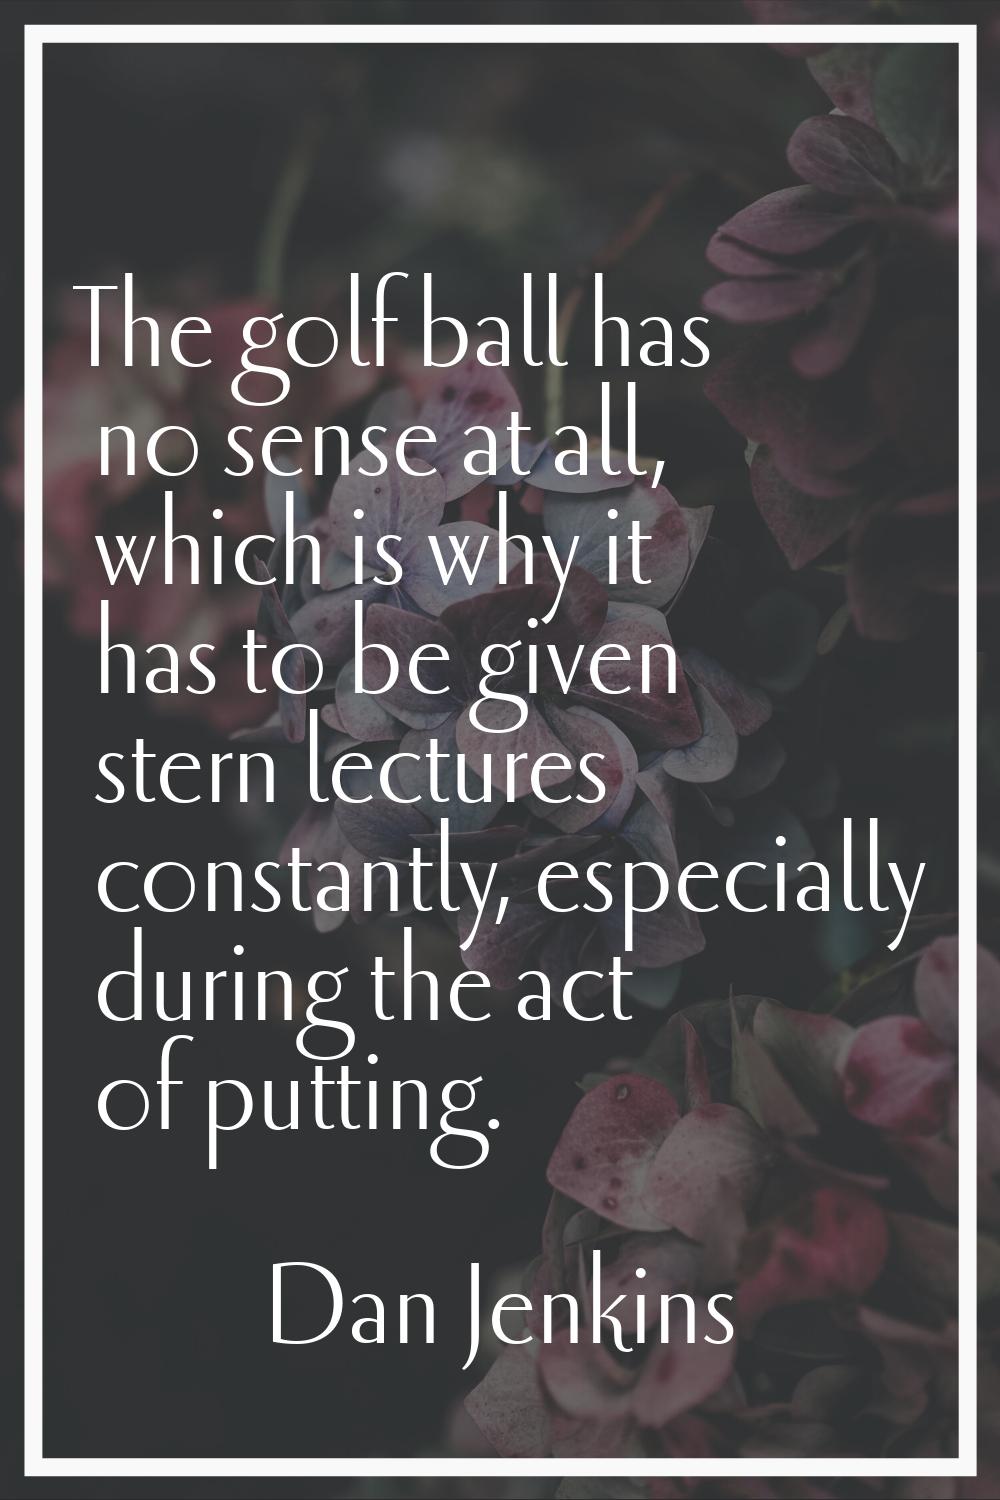 The golf ball has no sense at all, which is why it has to be given stern lectures constantly, espec